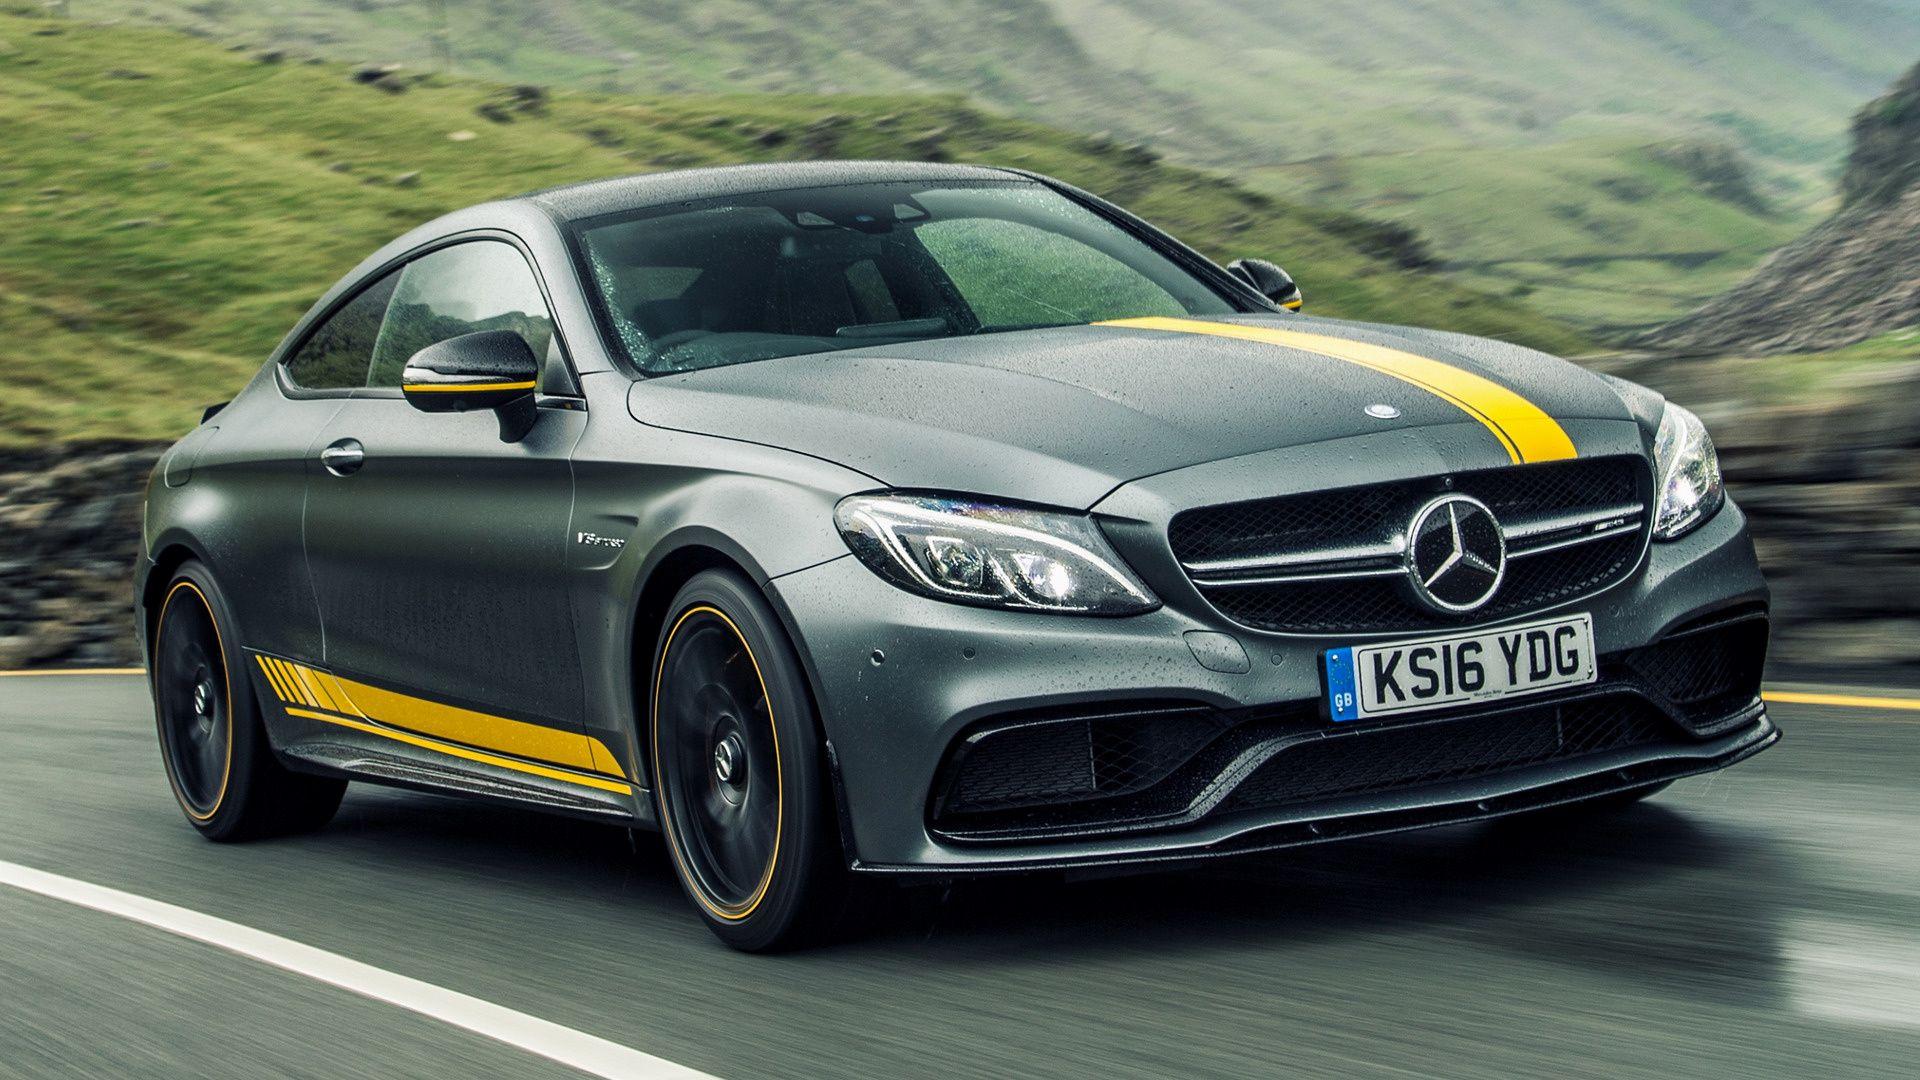 Mercedes AMG C 63 S Coupe Edition 1 (2016) UK Wallpaper And HD